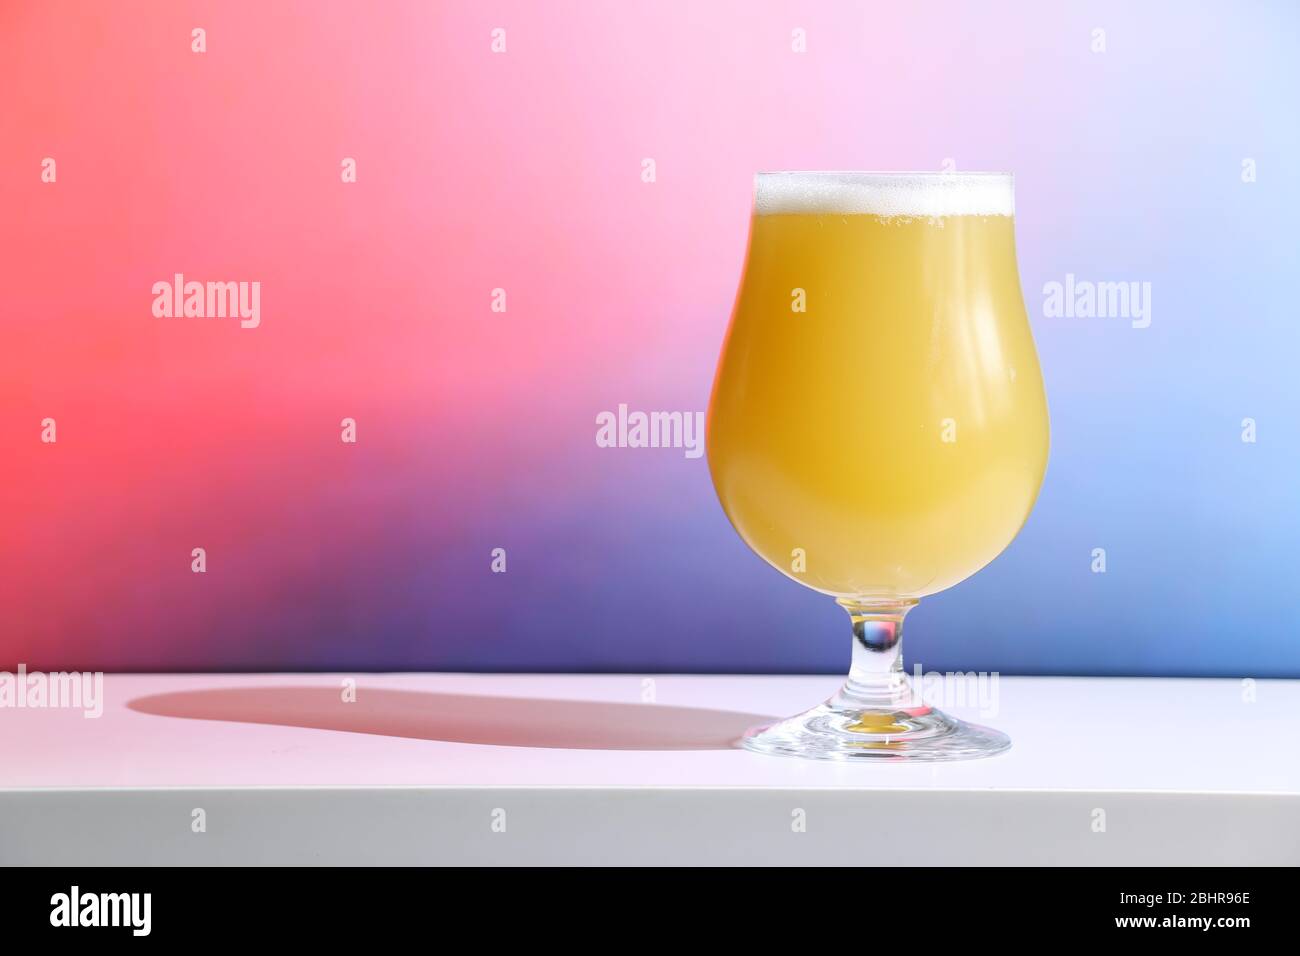 A hazy New England India pale ale beer in a tulip shaped glass against a soft background. Stock Photo